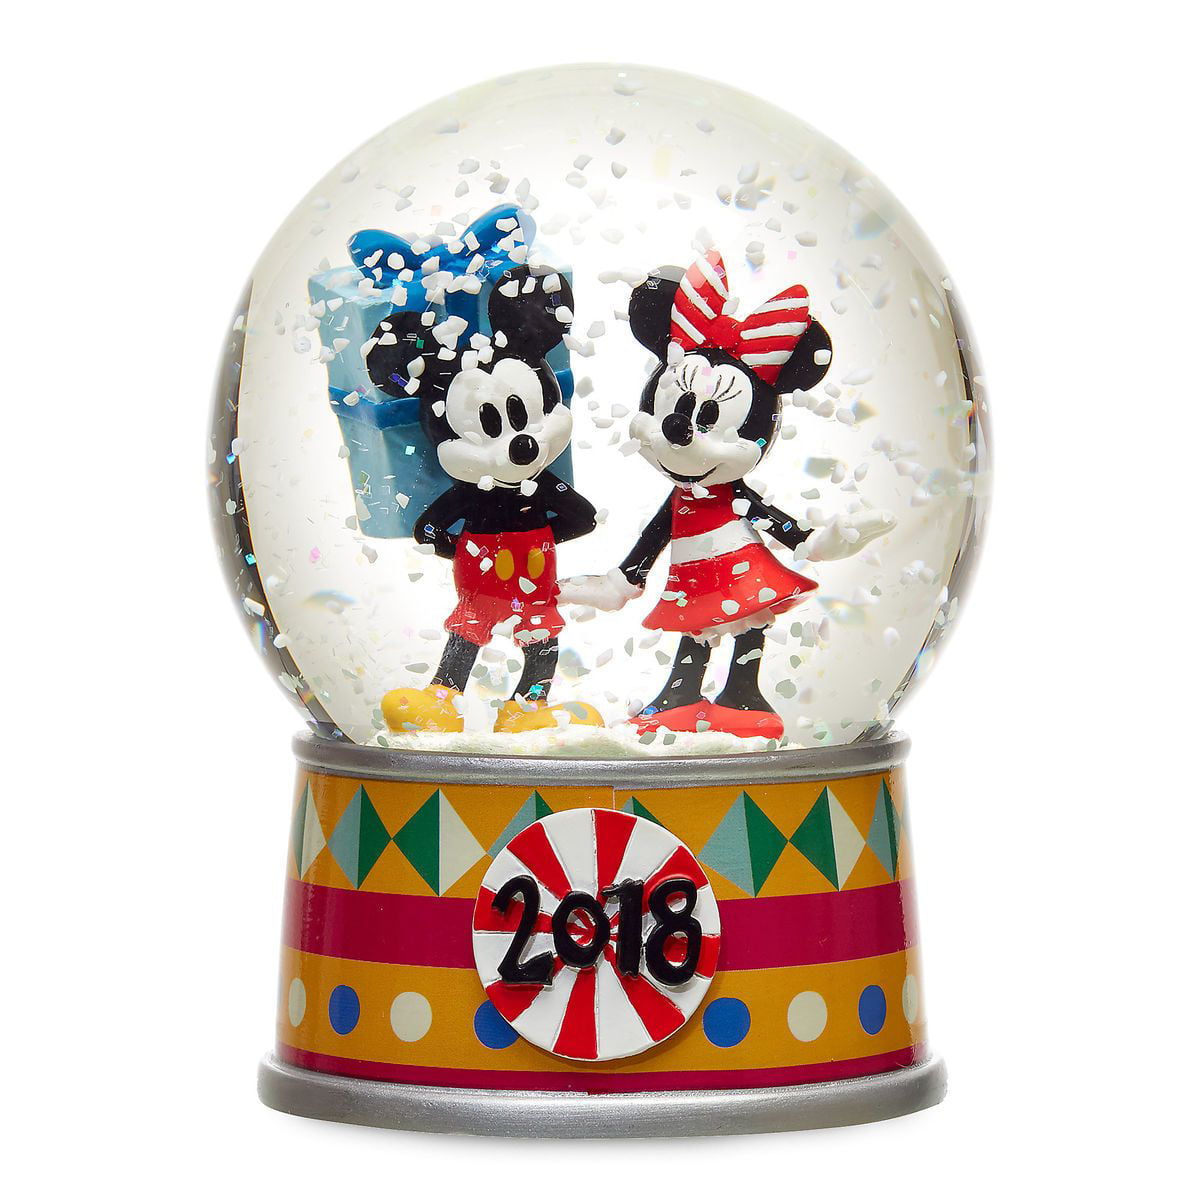 Disney Store Mickey and Minnie Mouse Christmas Holiday